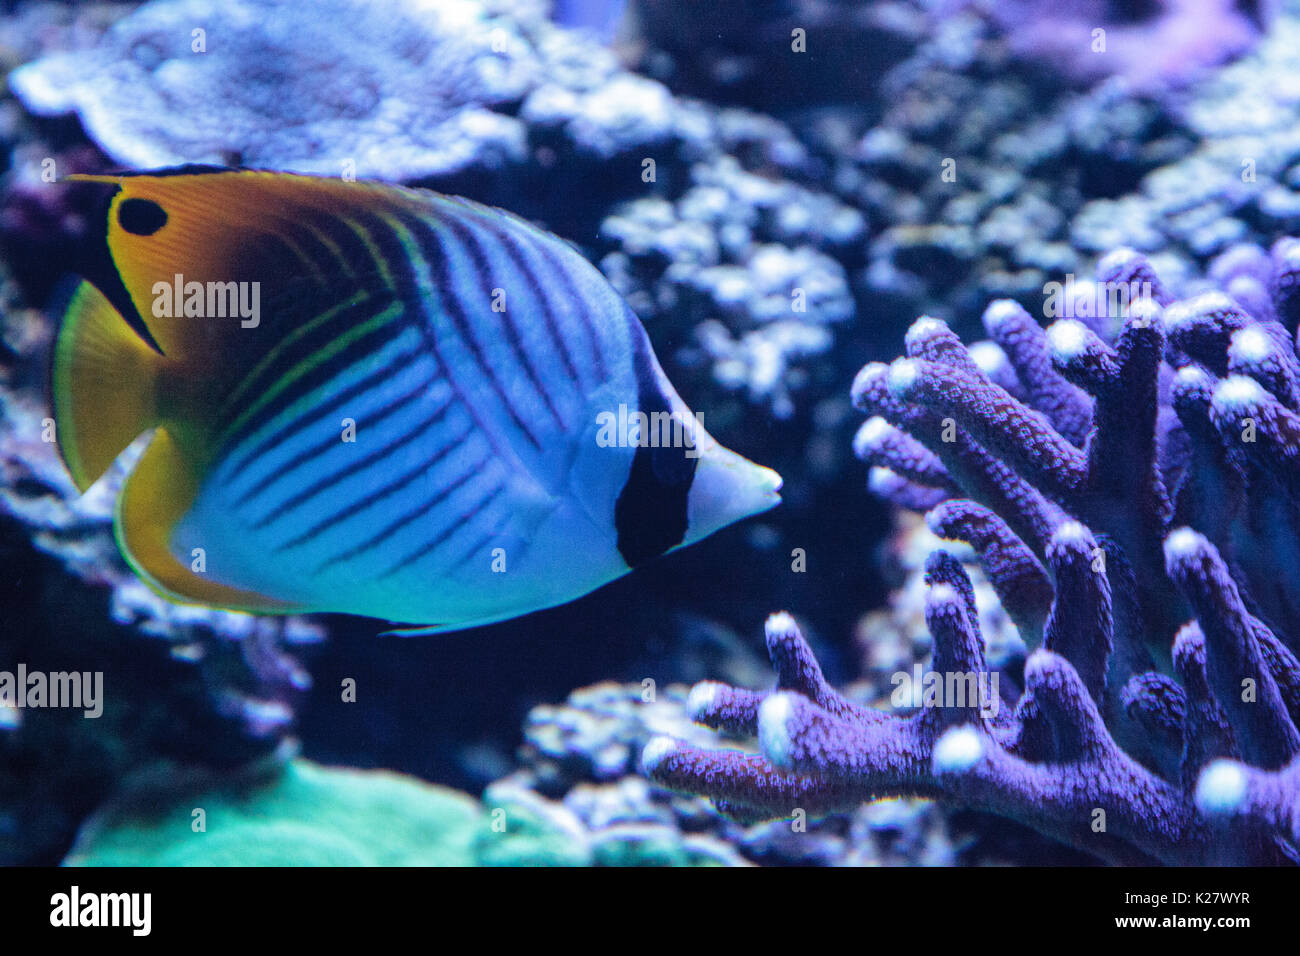 Raccoon butterflyfish Chaetodon lunula is found in the Indo-Pacific region. Stock Photo